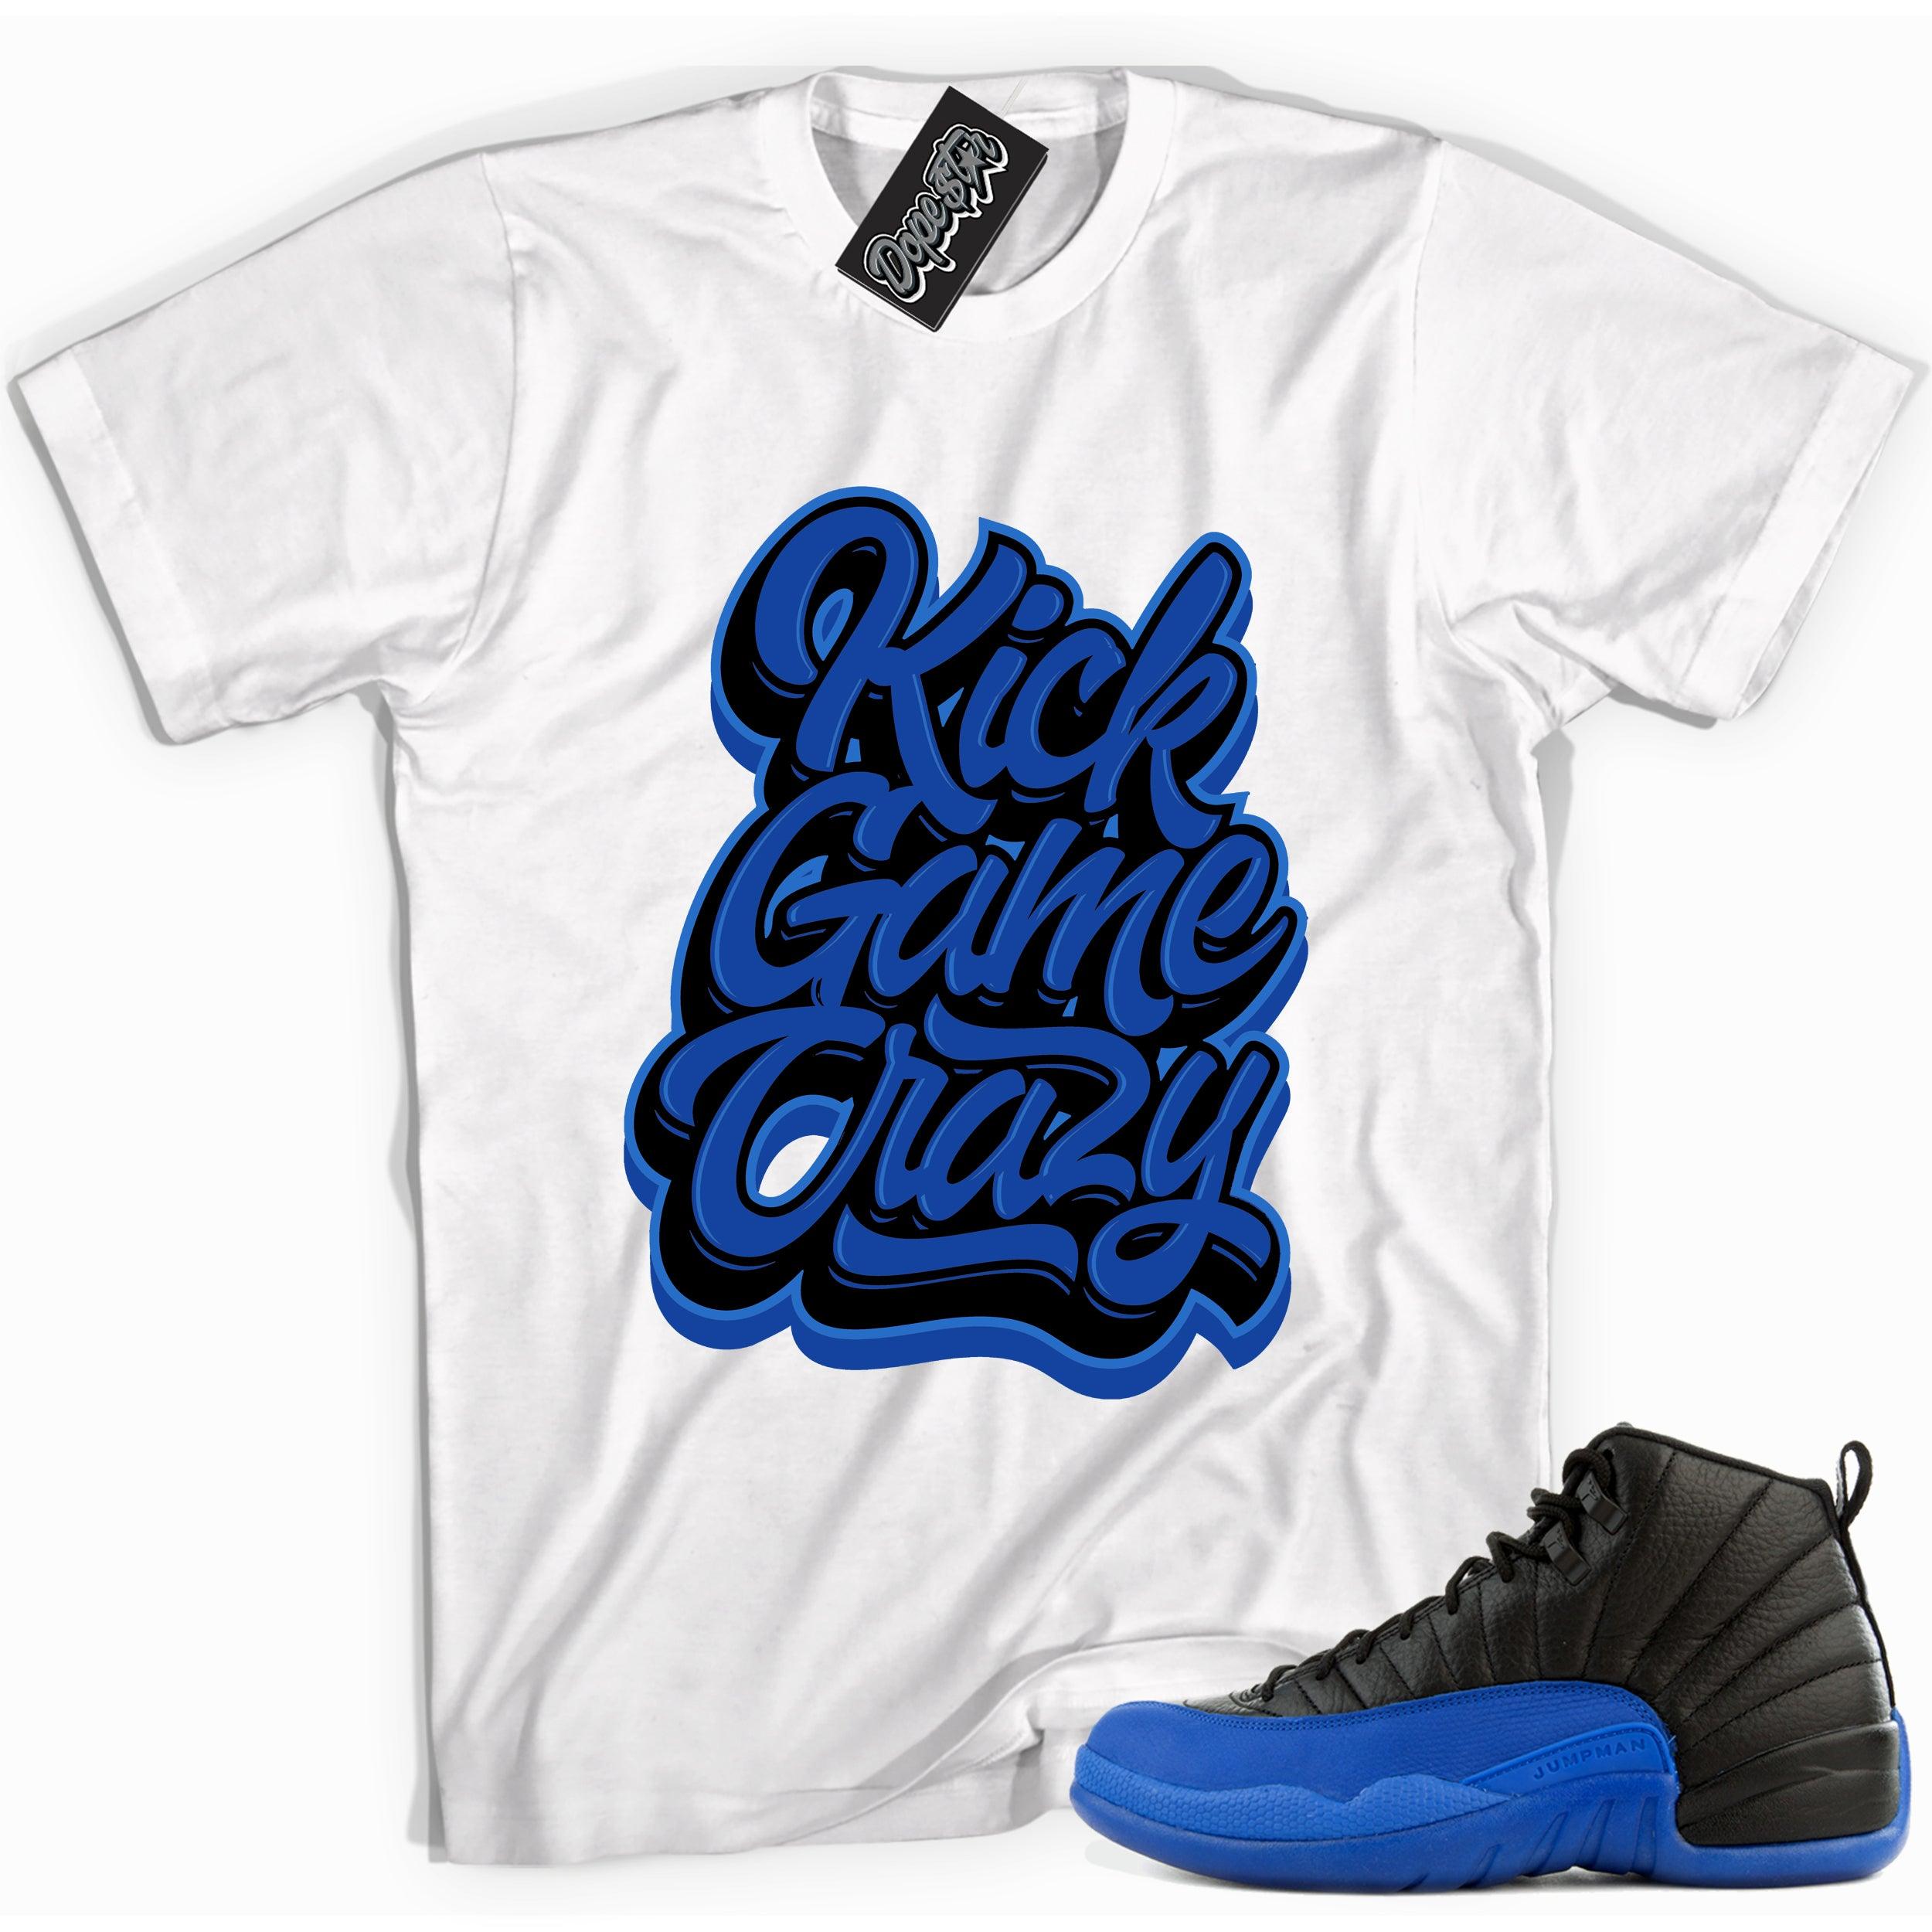 Cool white graphic tee with 'kick game crazy' print, that perfectly matches Air Jordan 12 Retro Black Game Royal sneakers.